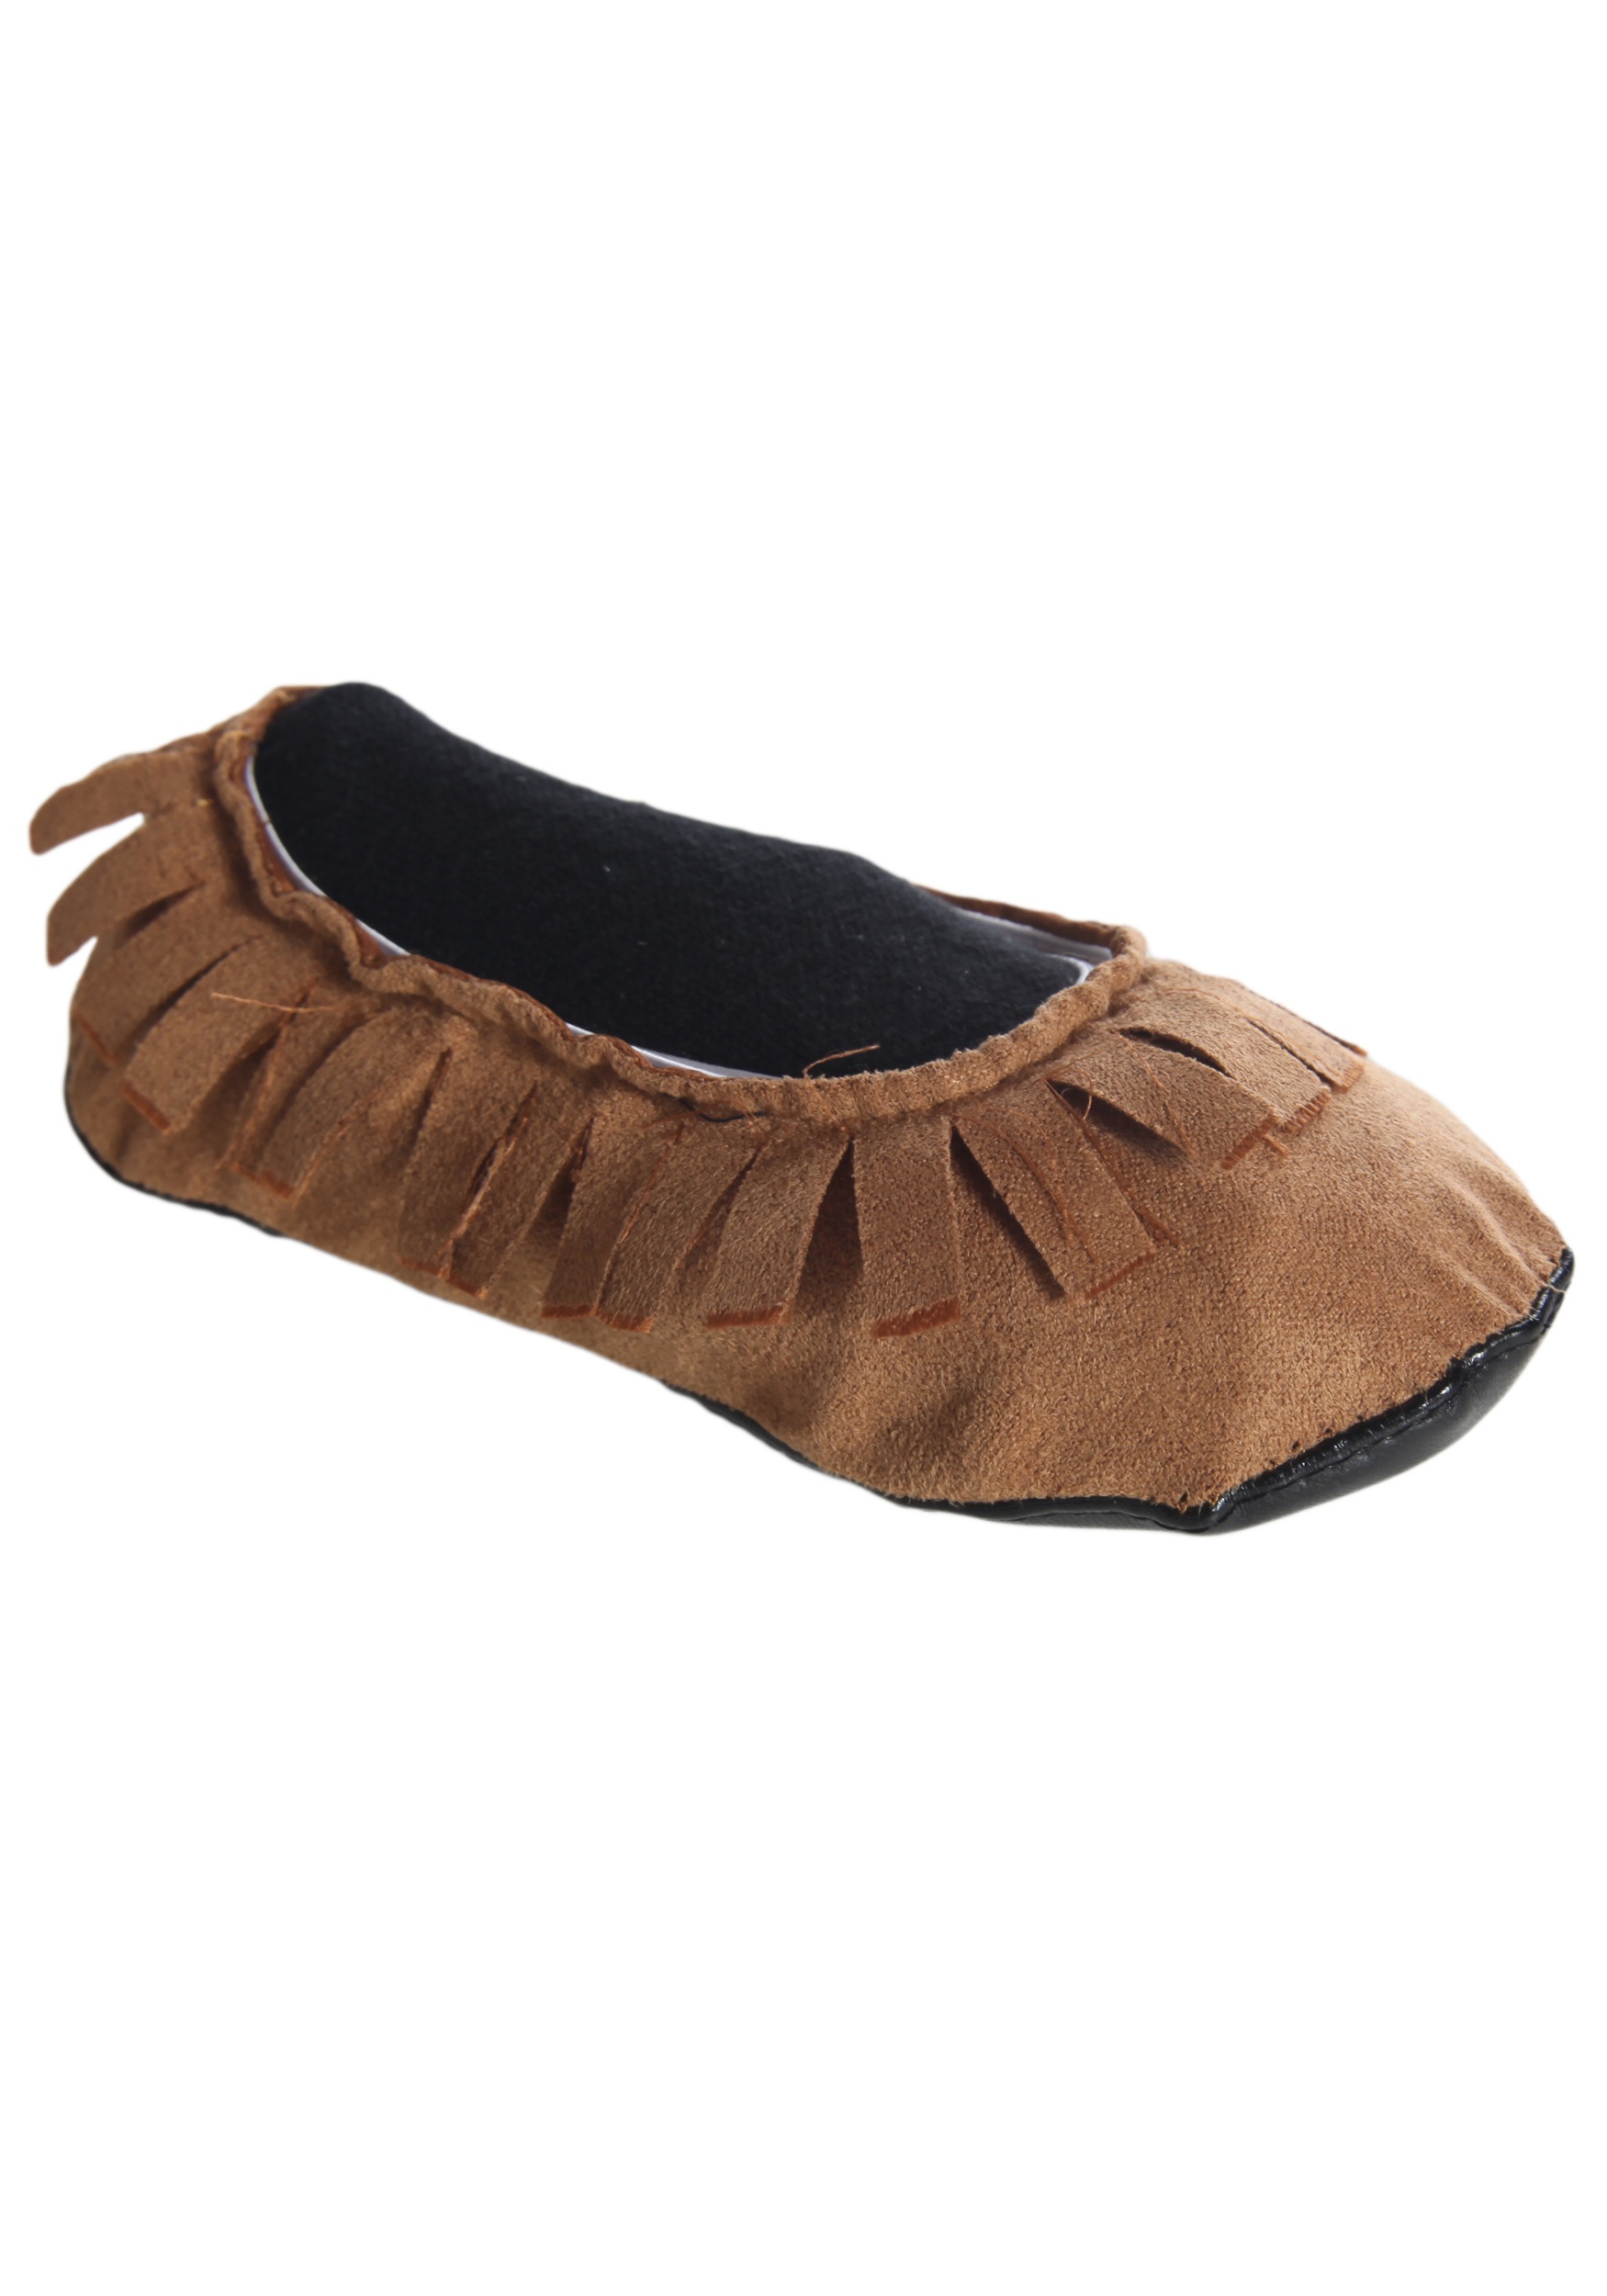 70s Hippie Fringed Moccasins , Costume Accessory